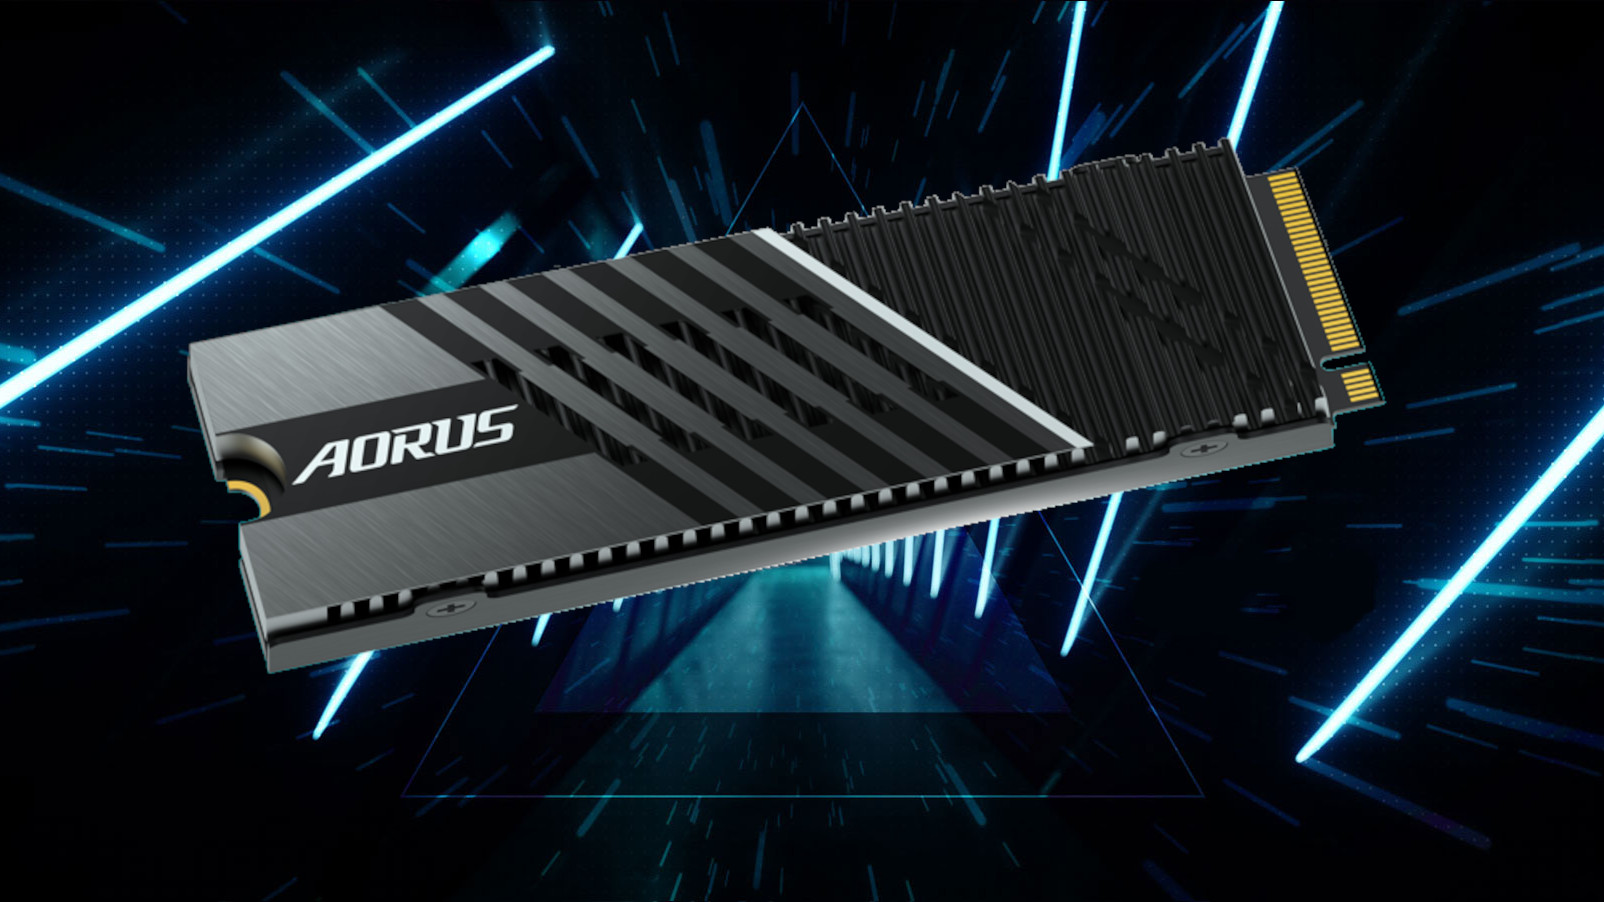 Save 43% on this 1TB NVMe SSD from Gigabyte Aorus